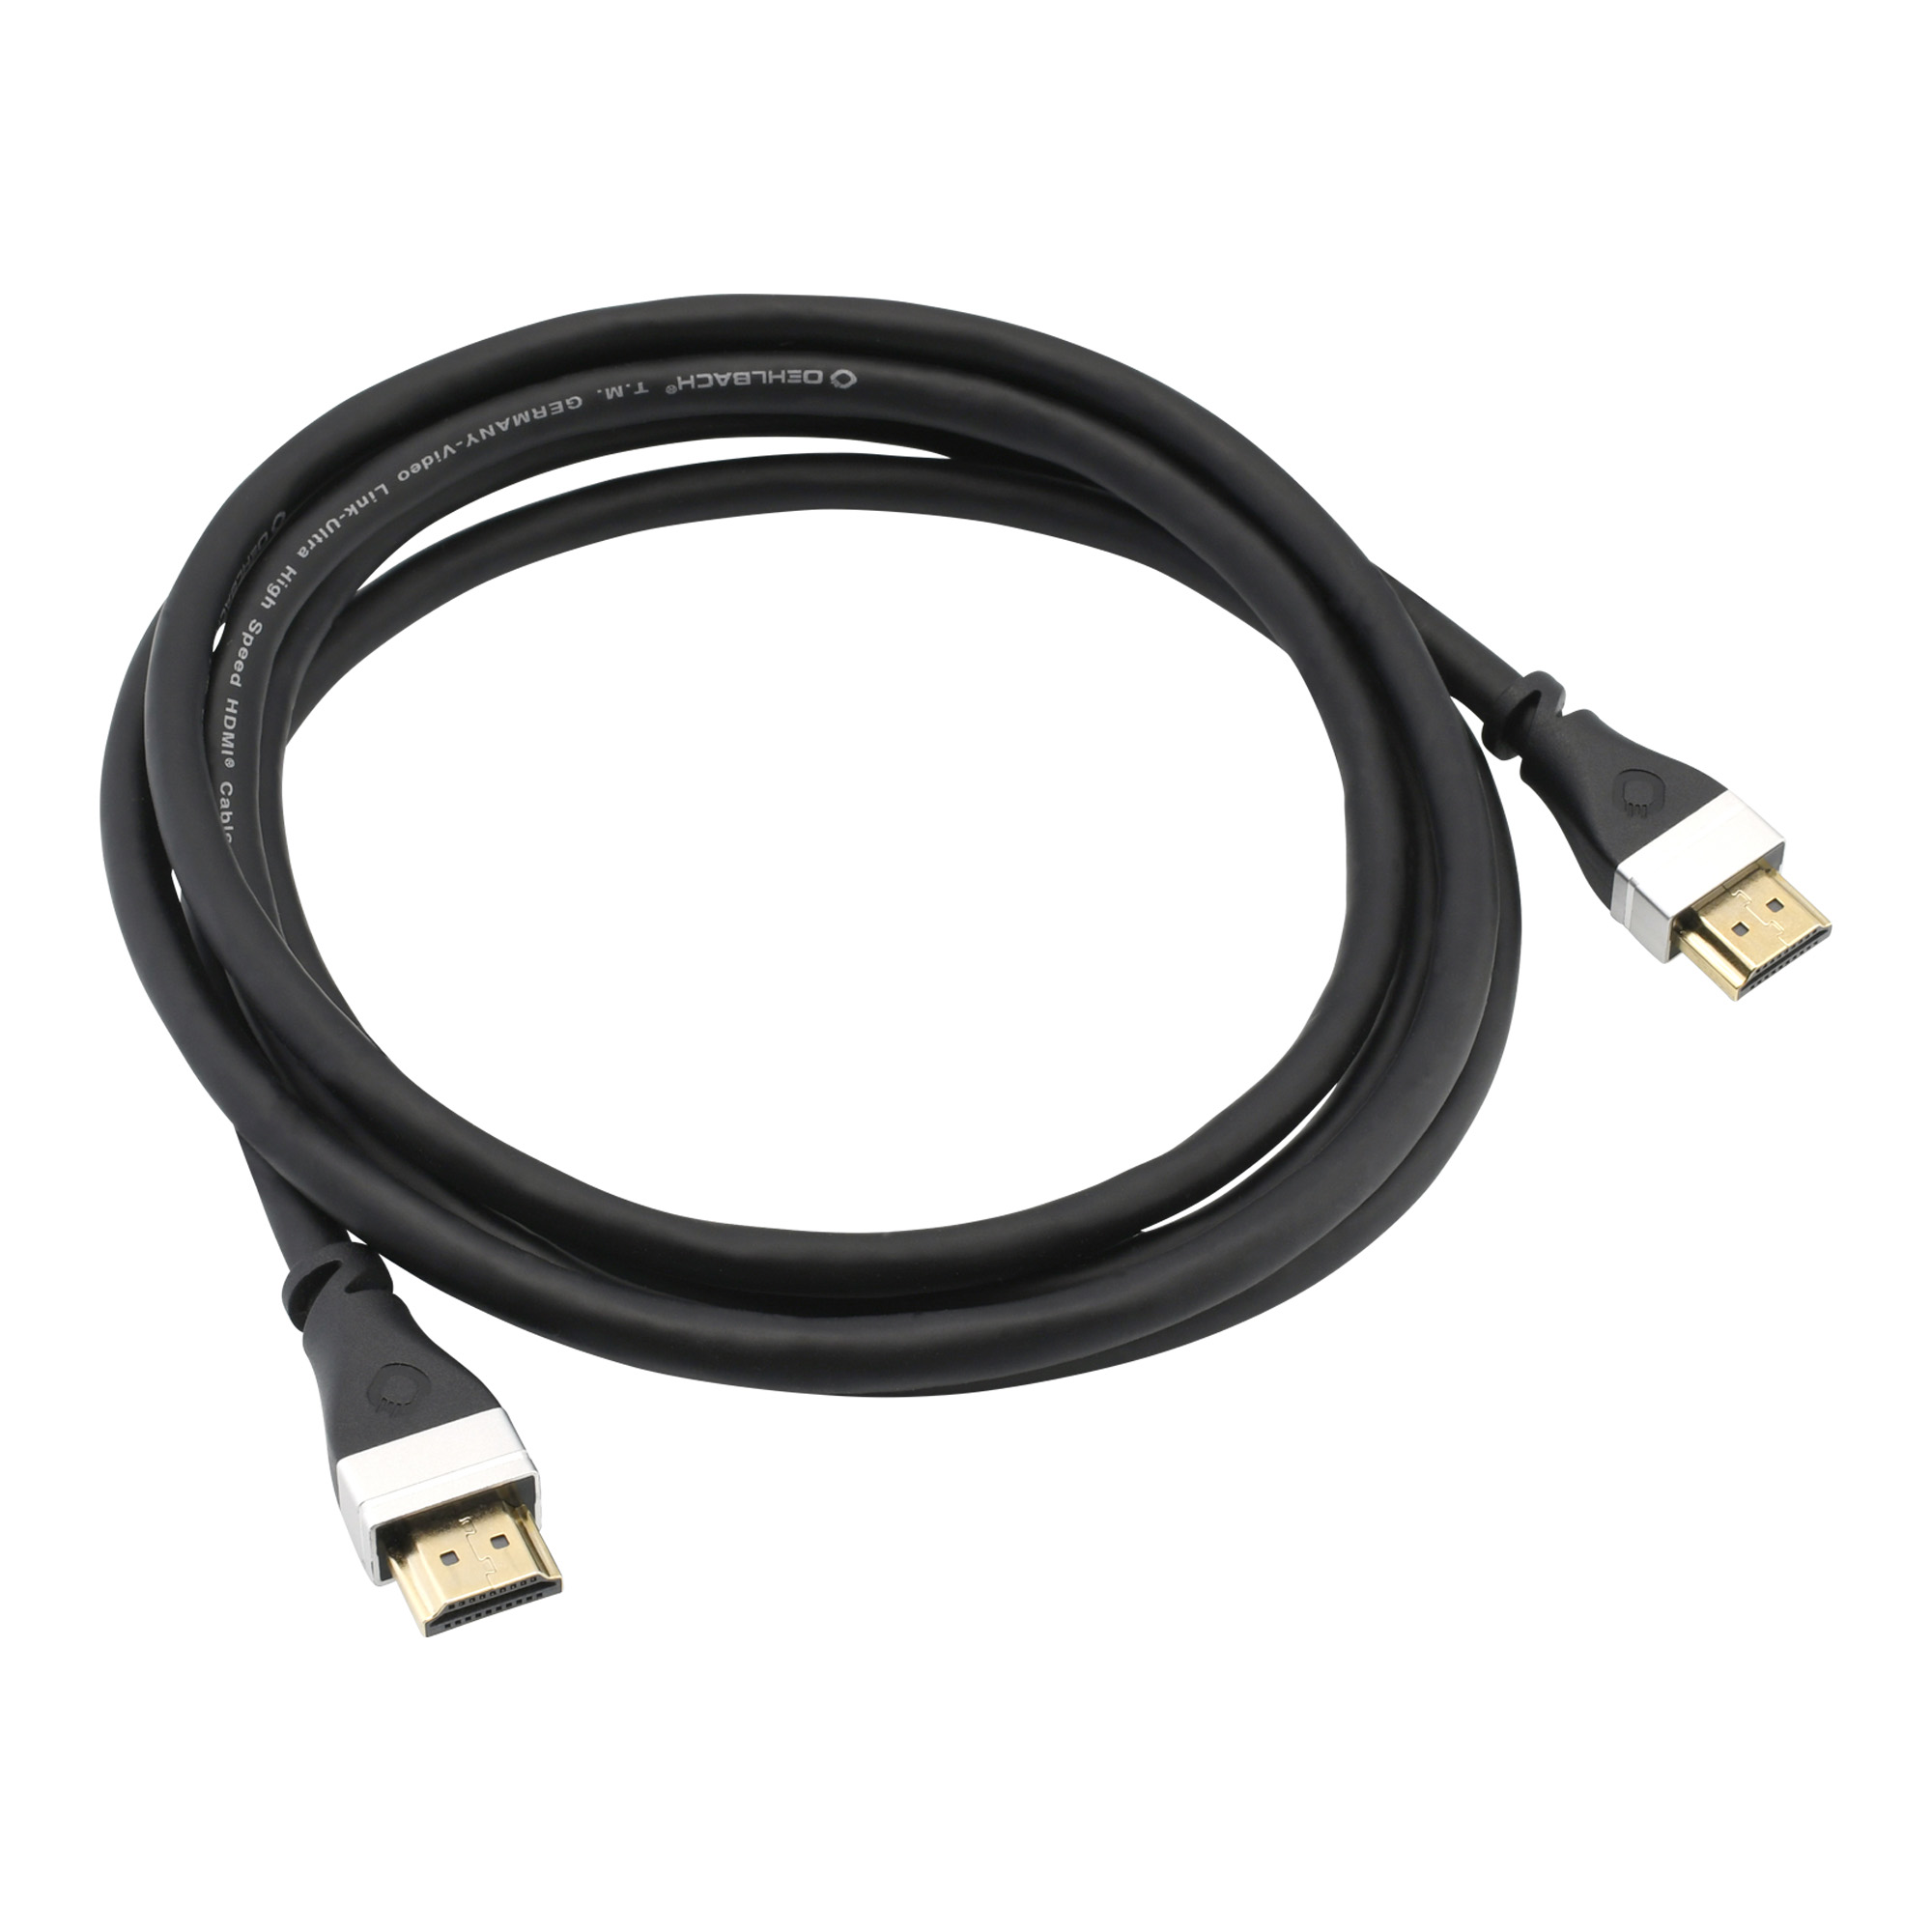 Кабель Oehlbach EXCELLENCE Video Link HDMI 2.1 Cable Black 1.5m - фото 1